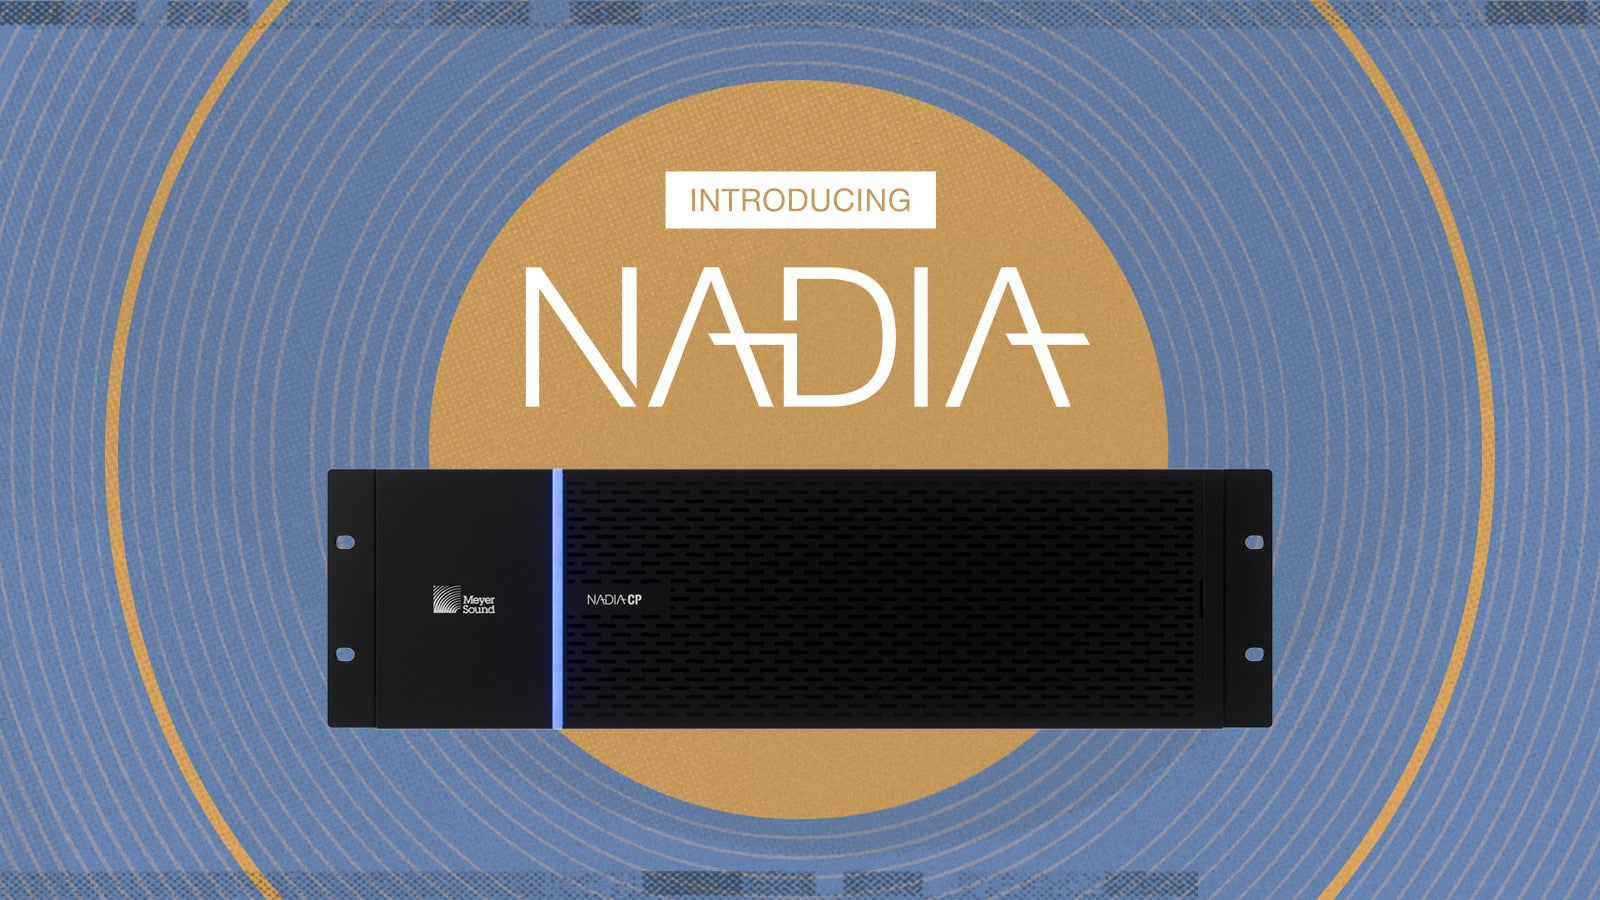 Meyer Sound Introduces the NADIA Integrated Digital Audio Platform for Constellation Acoustic System Installations